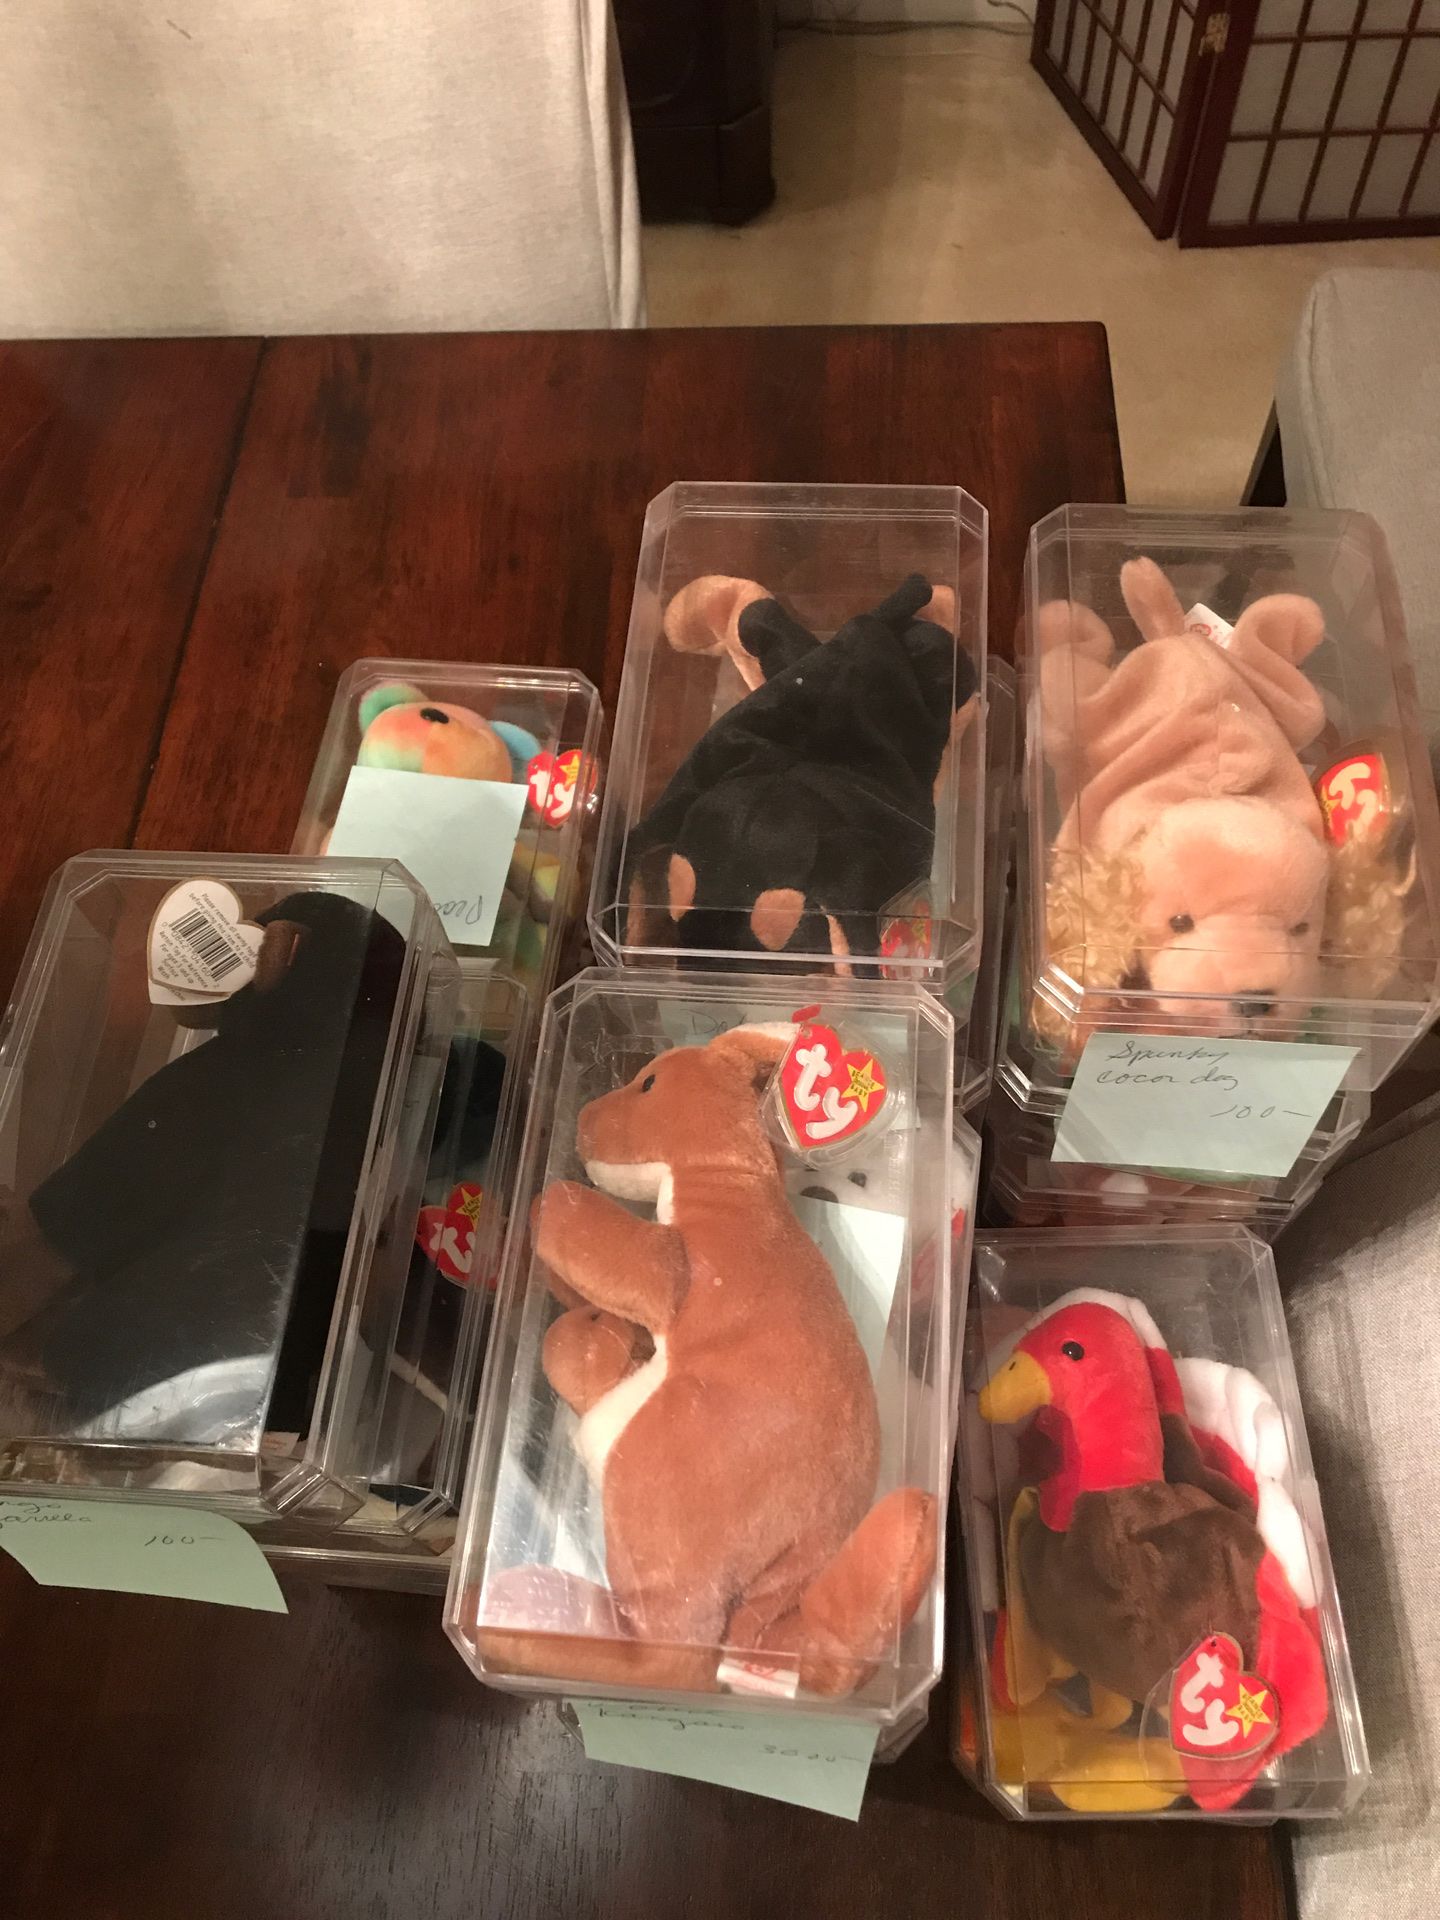 Beanie baby collection for sale.